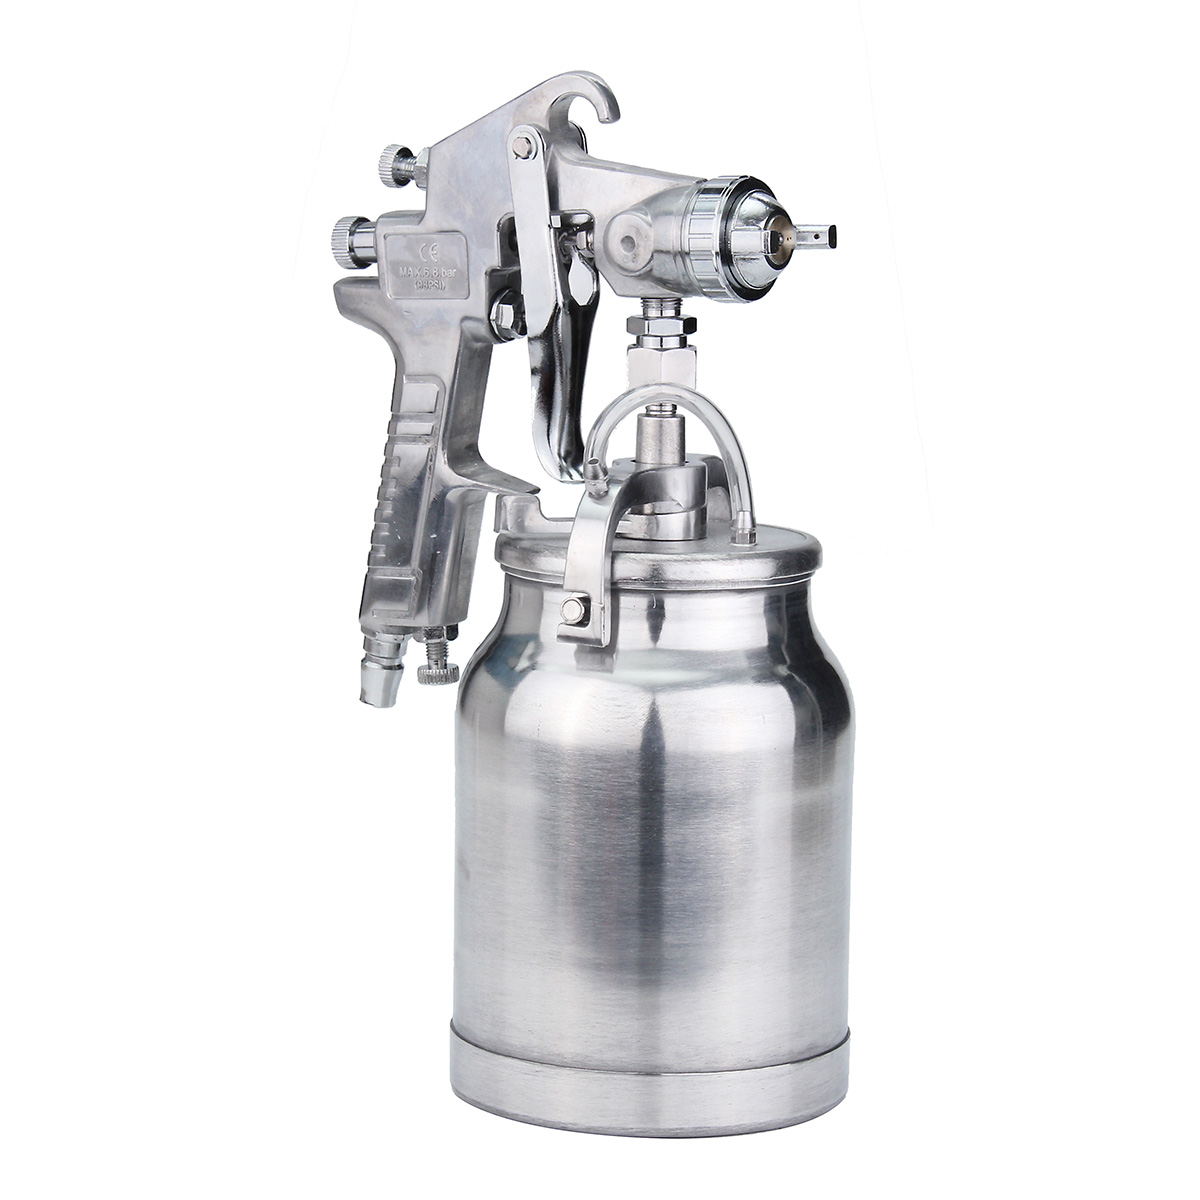 3-In-1-Suction-Feed-Heavy-Duty-Paint-Spray-Sprayer-1L-Pot-14Inch-Air-Hose-Fitting-1264292-1